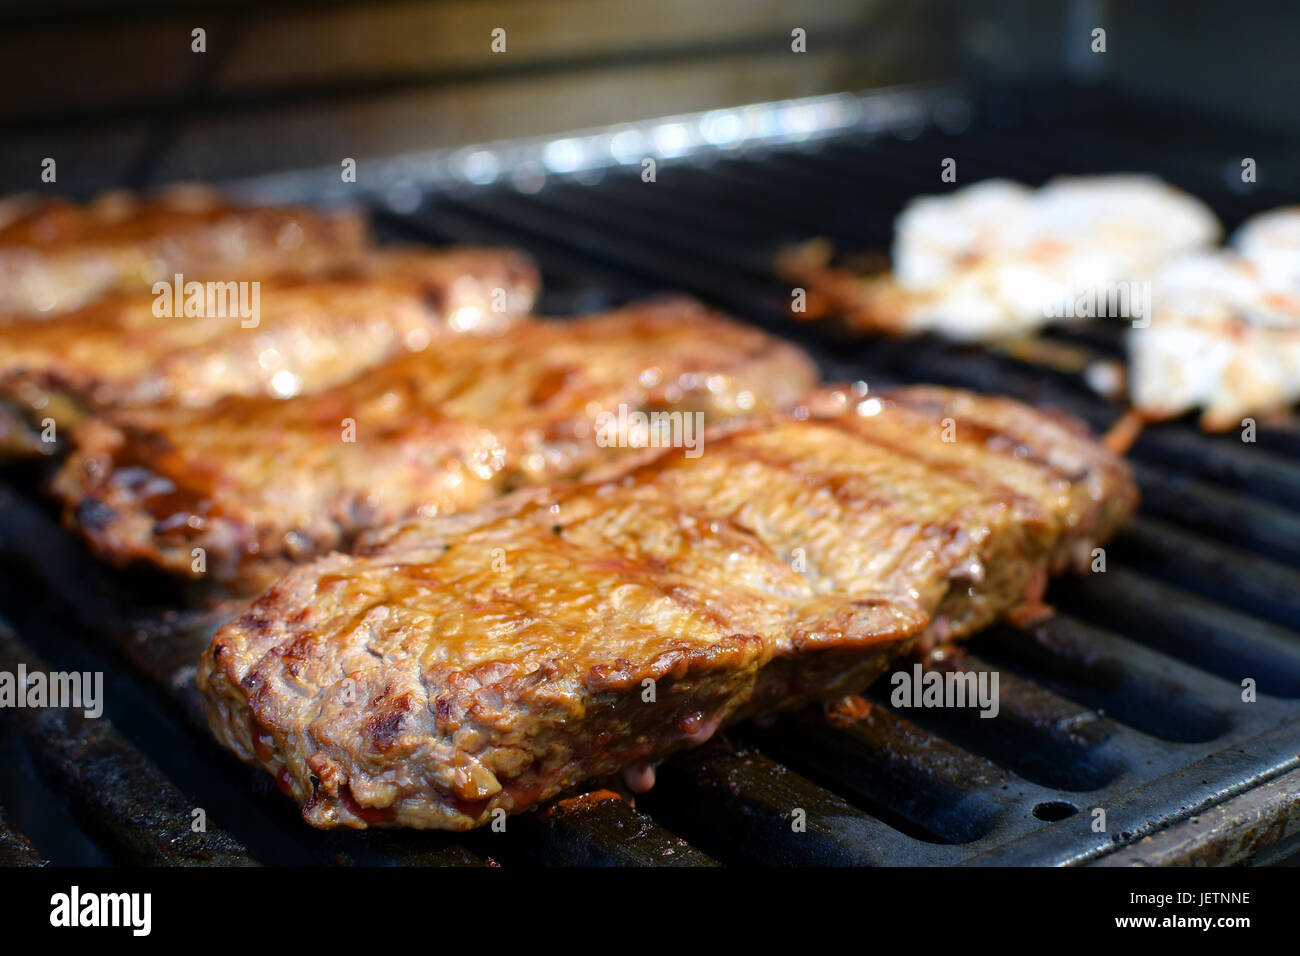 Juicy beef sirloin steaks on barbecue grill. Focus on foreground. Stock Photo